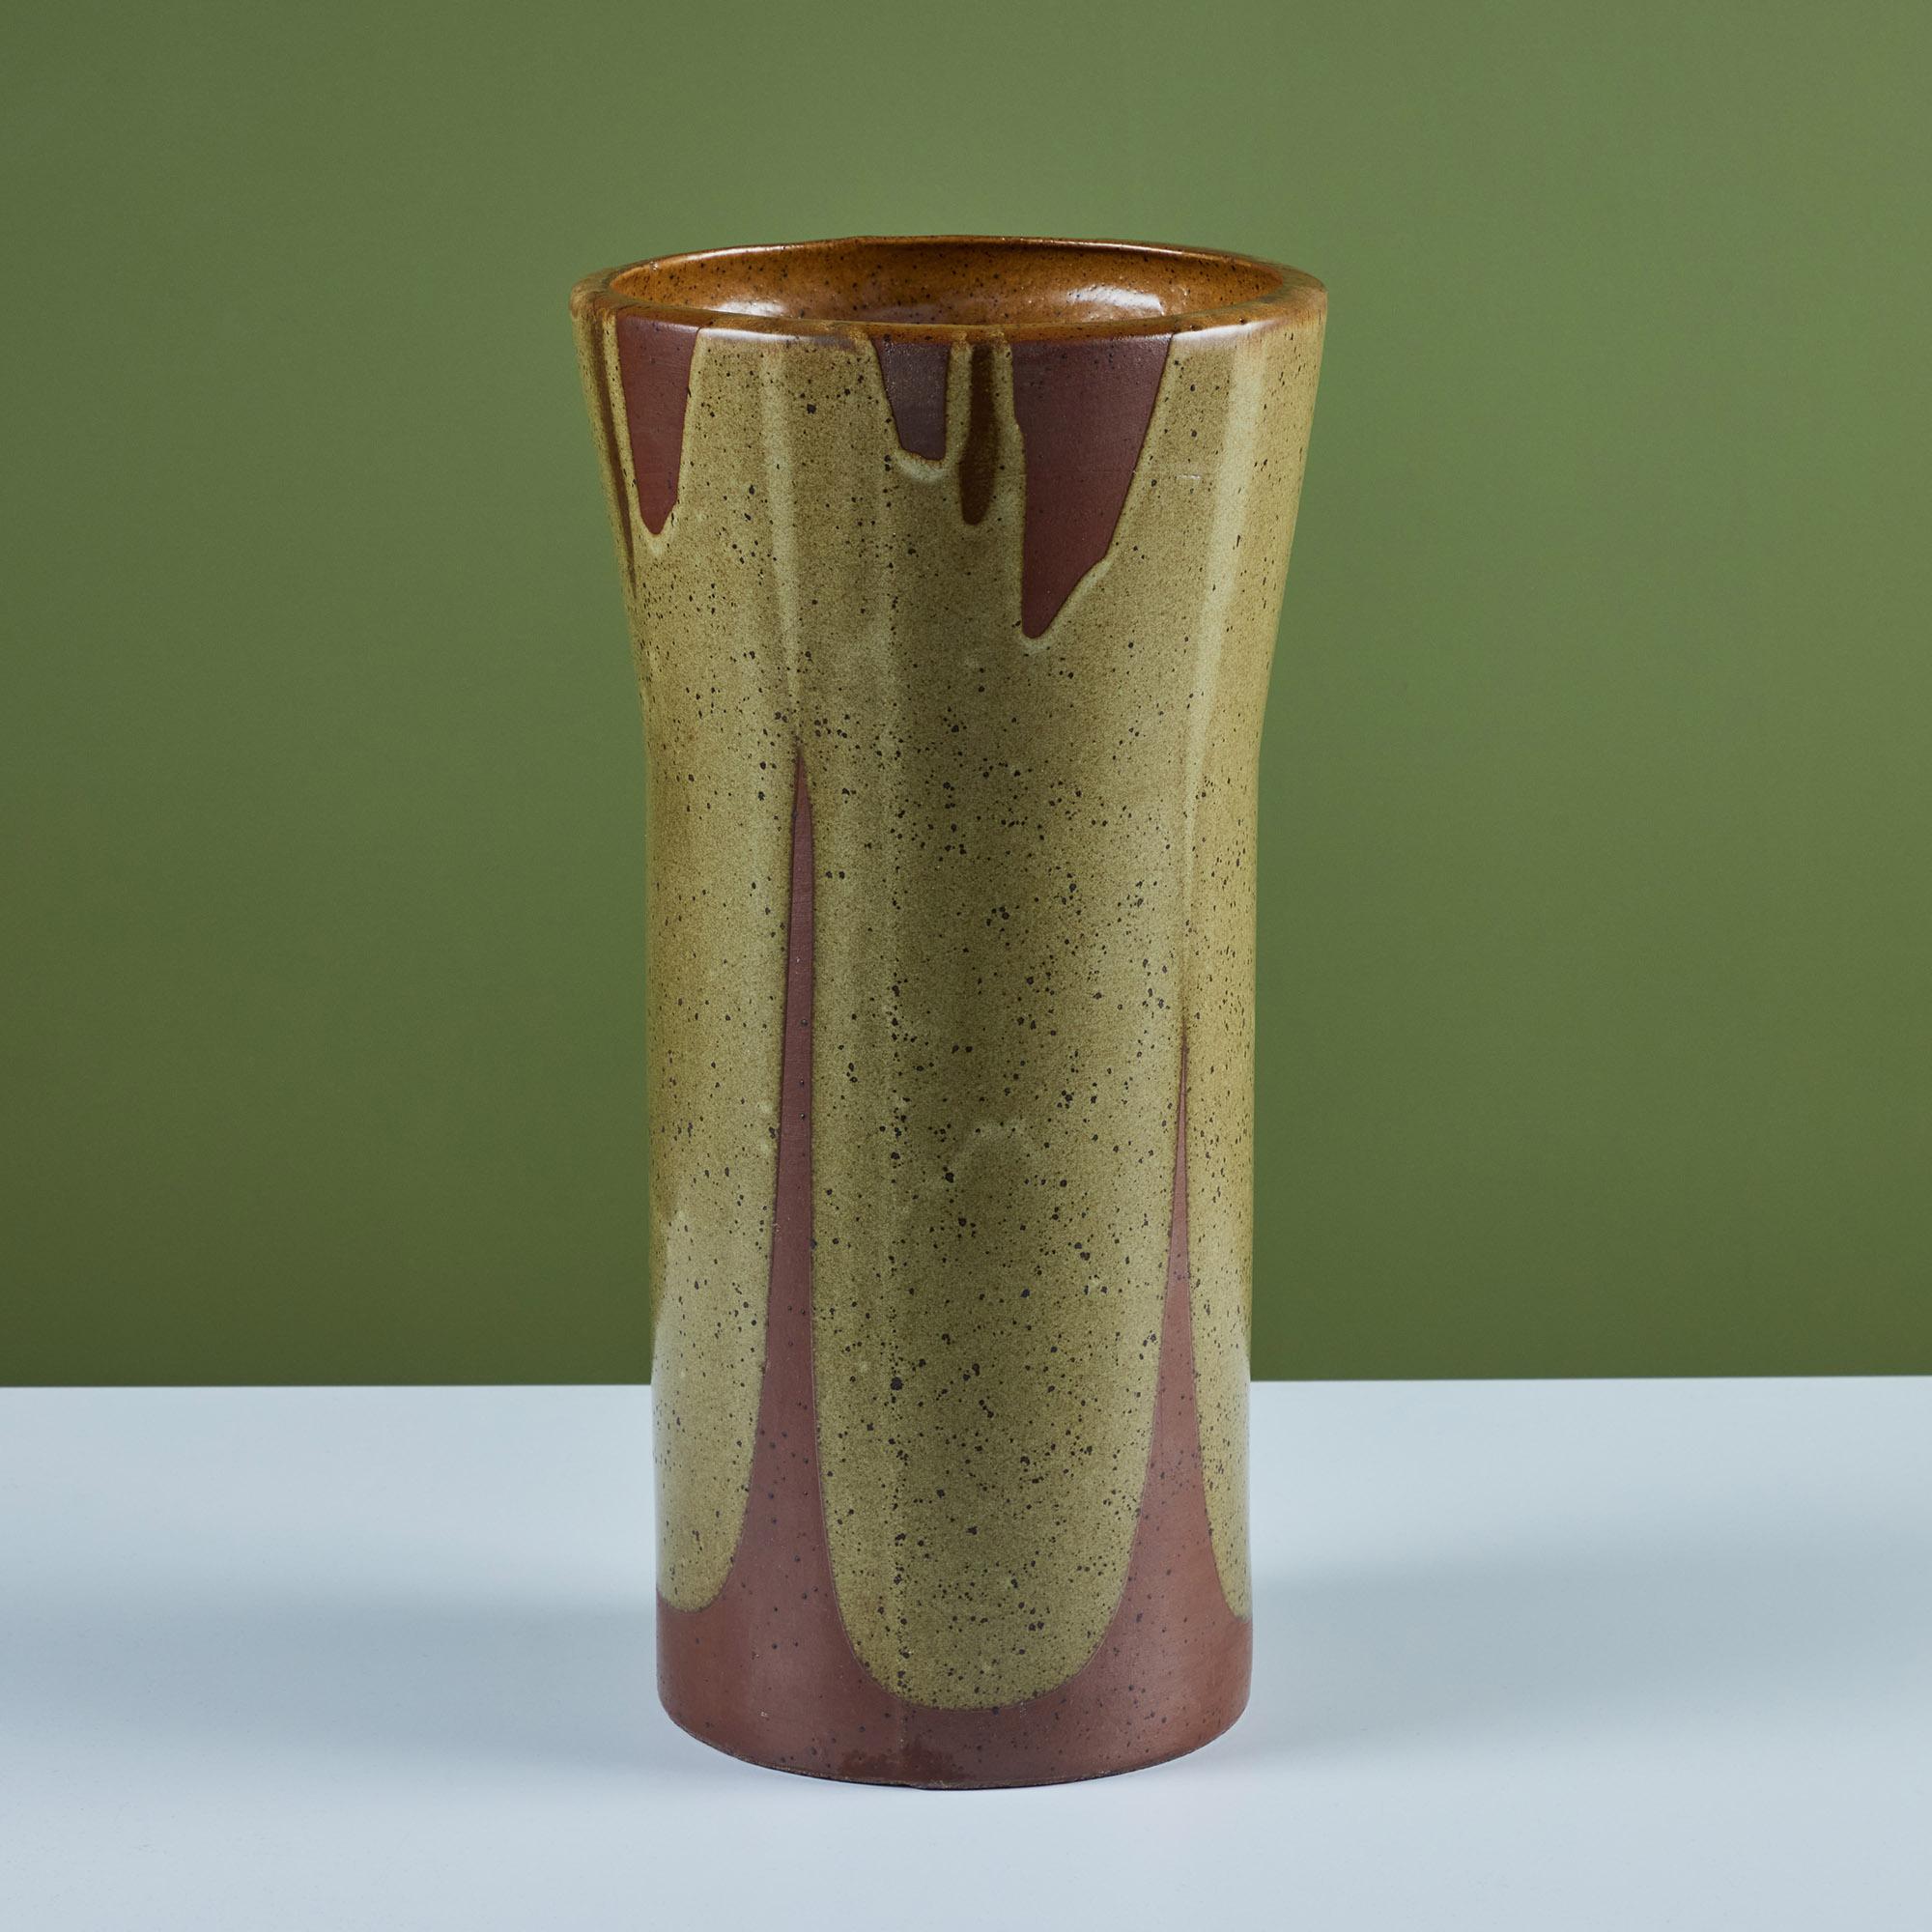 Planter by David Cressey for Architectural Pottery's Pro/Artisan collection with Cressey’s signature “Flame Glaze” in yellow and orange tones. This planter has slightly bowed sides and a flattened lip.

Dimensions
10.25